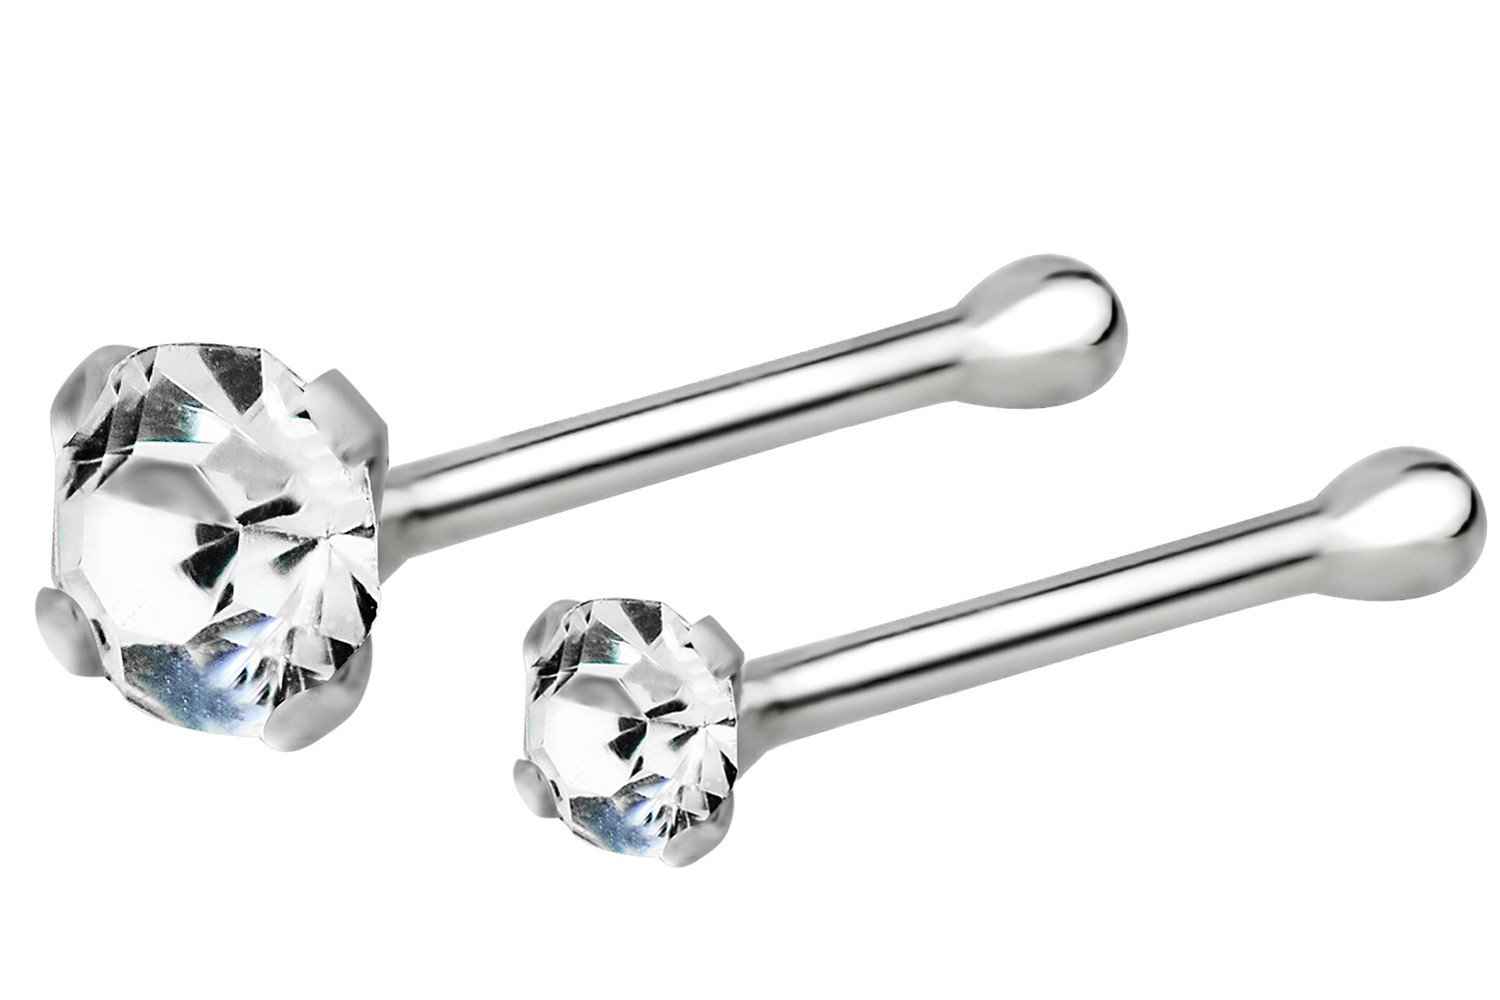 Forbidden Body Jewelry Nose Rings 22G Sterling Silver CZ Simulated Diamond Nose Studs, 1.5 mm & 2.5mm